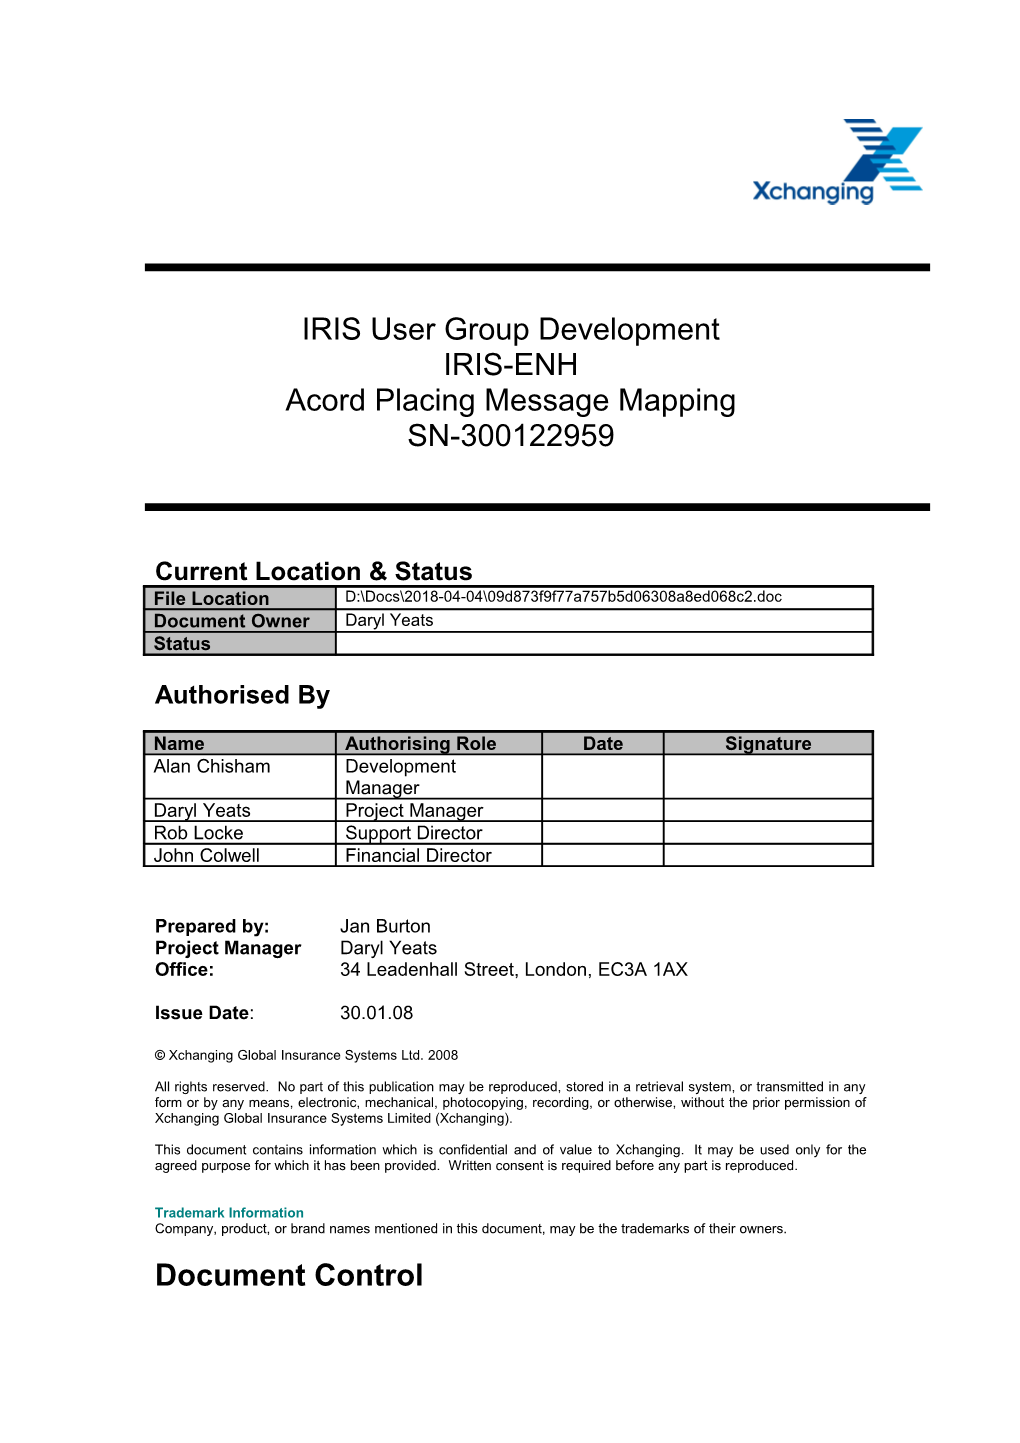 300122959-Acord Placing Message Mapping (Functional Specification)